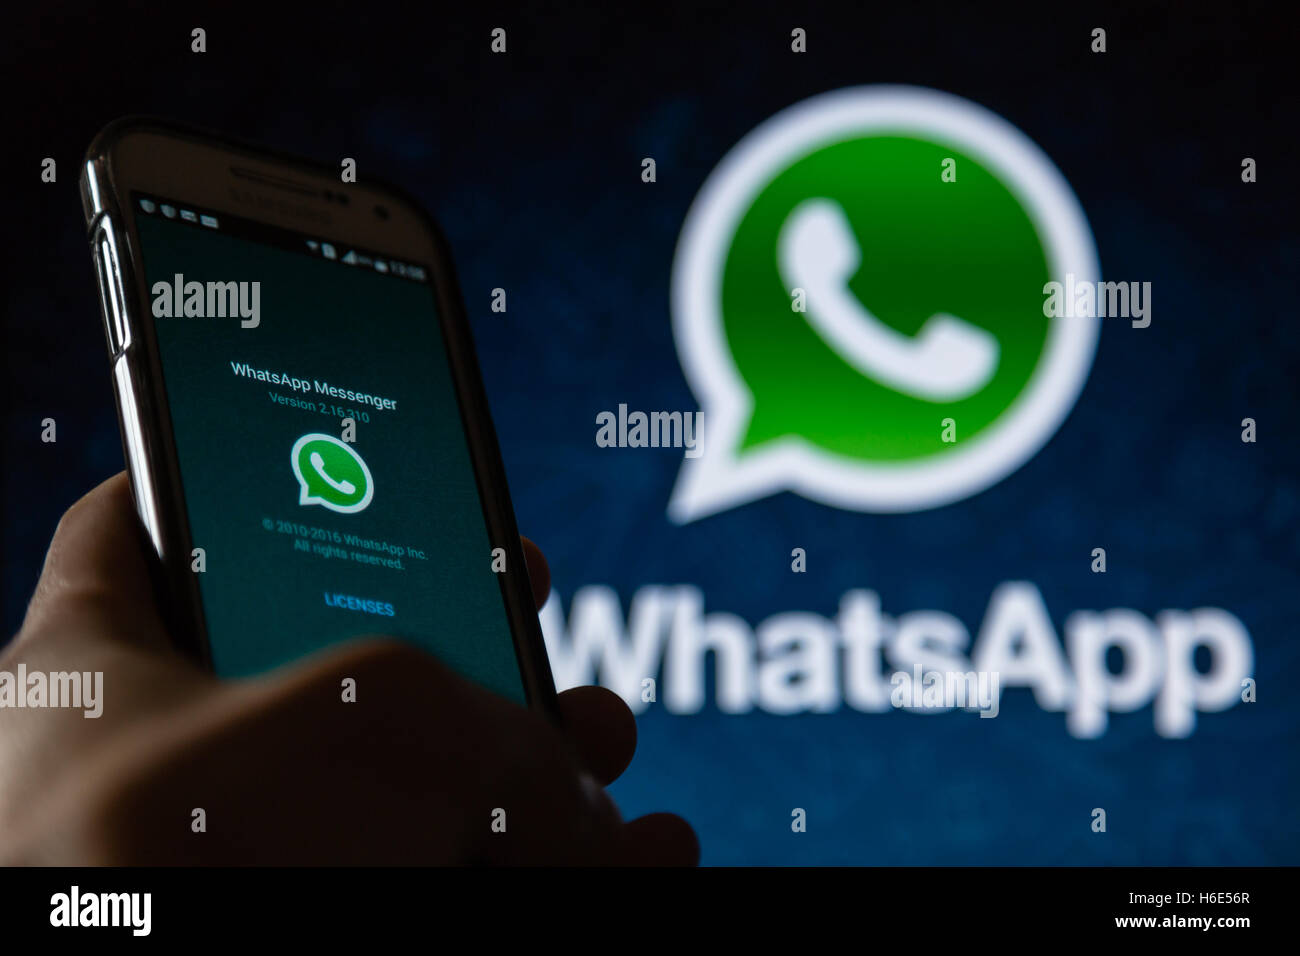 A smartphone display shows WhatsApp Messenger application Stock Photo